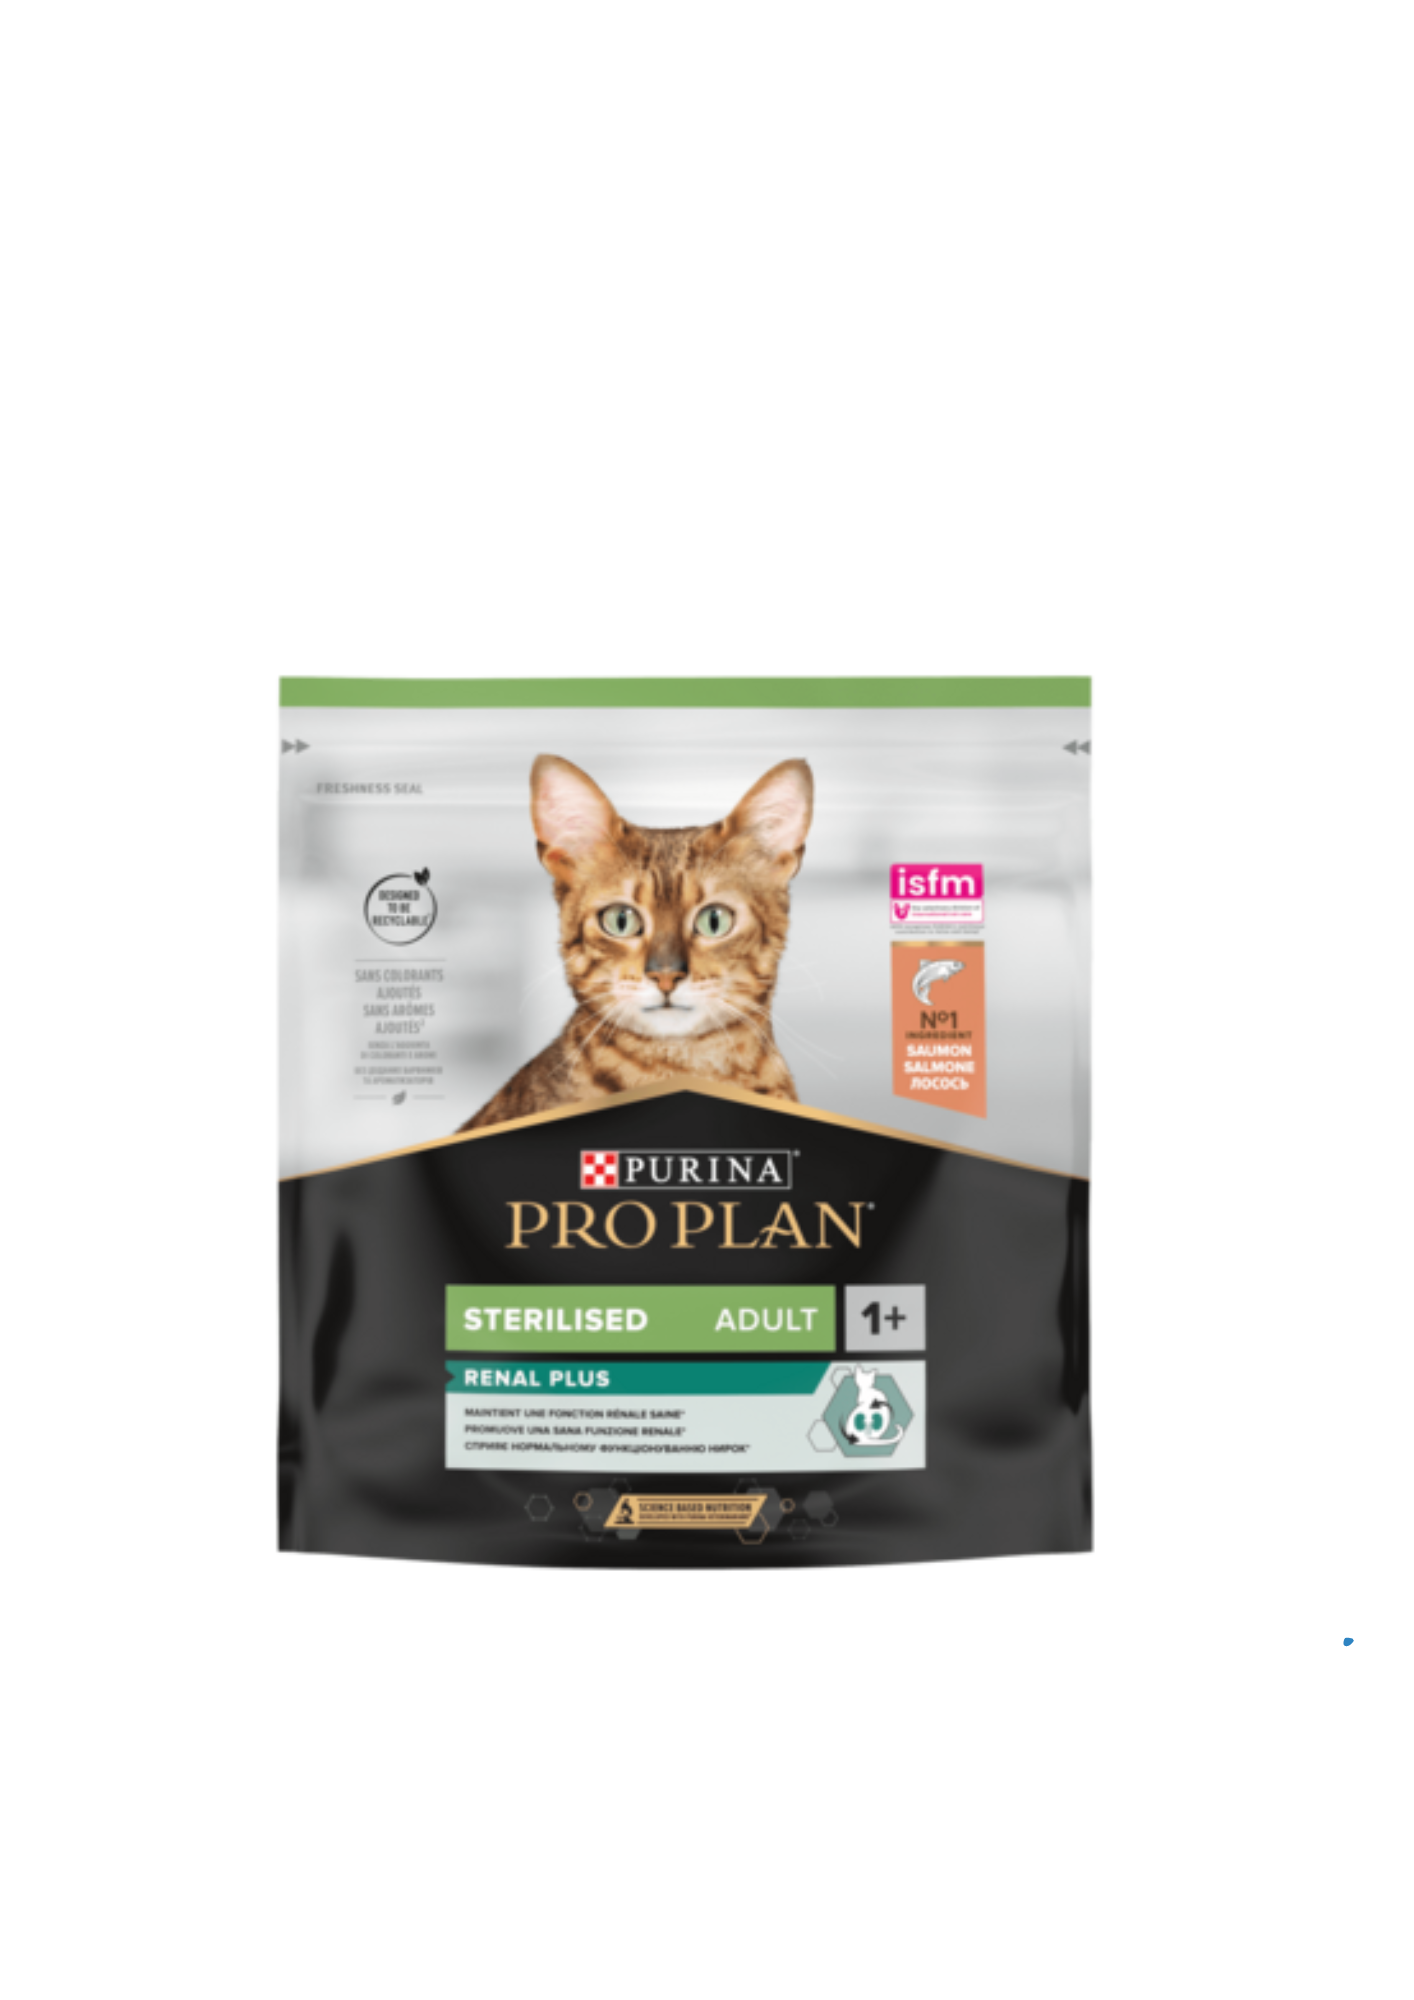 Purina PRO PLAN®  Sterilized Adult Renal Plus Dry Cat Food with Salmon, 400g